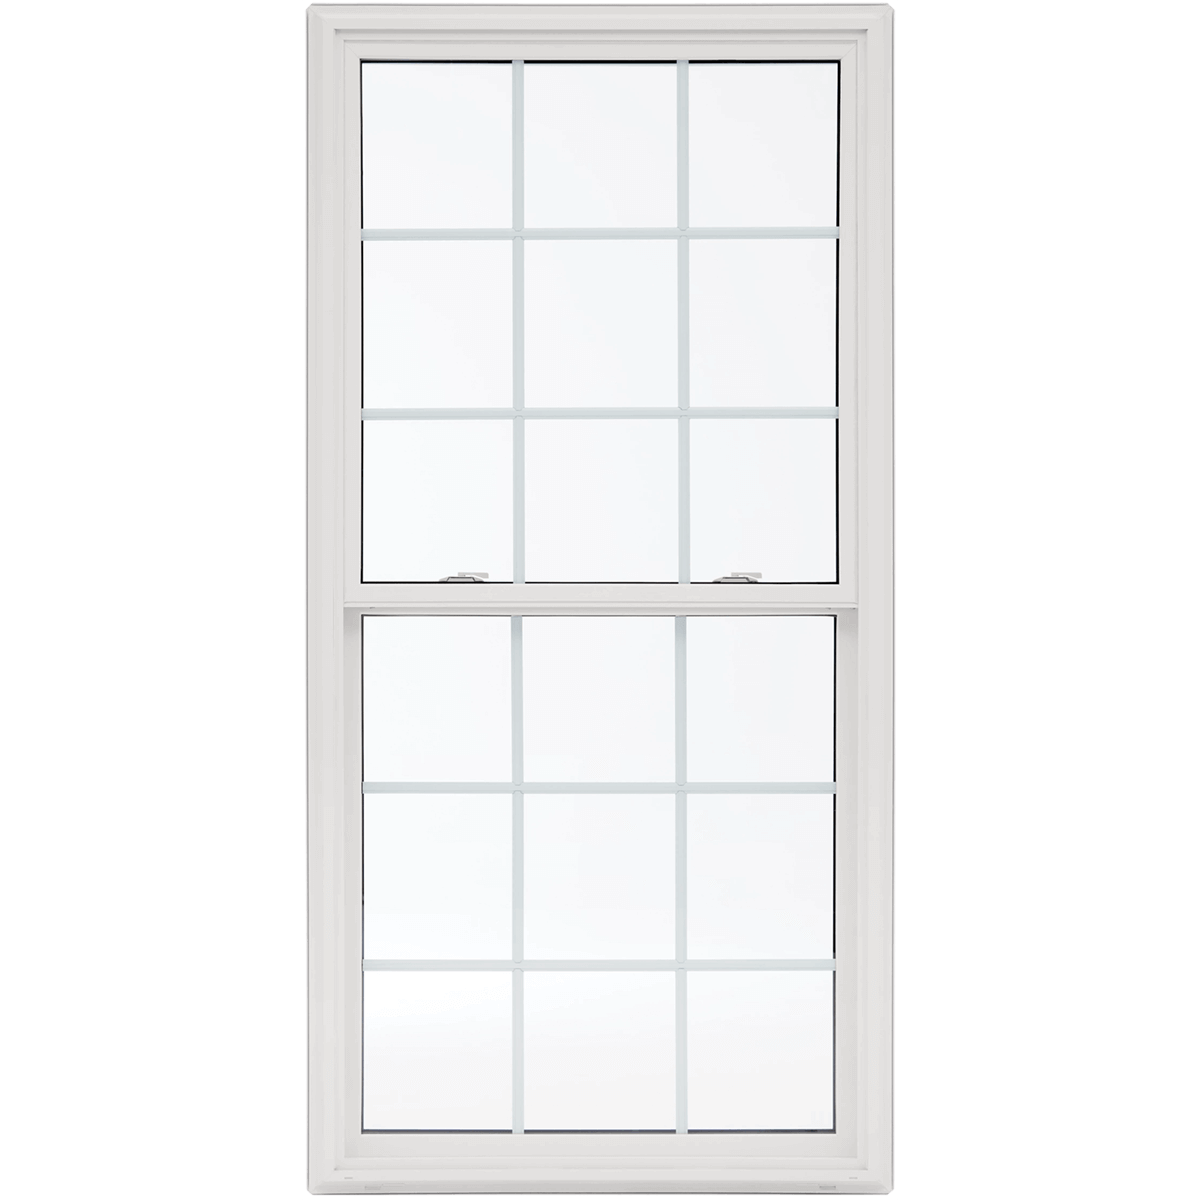 A double or single hung windows is vertical sliding window with movable sash(es), counterbalanced by weights or springs for ventilation.